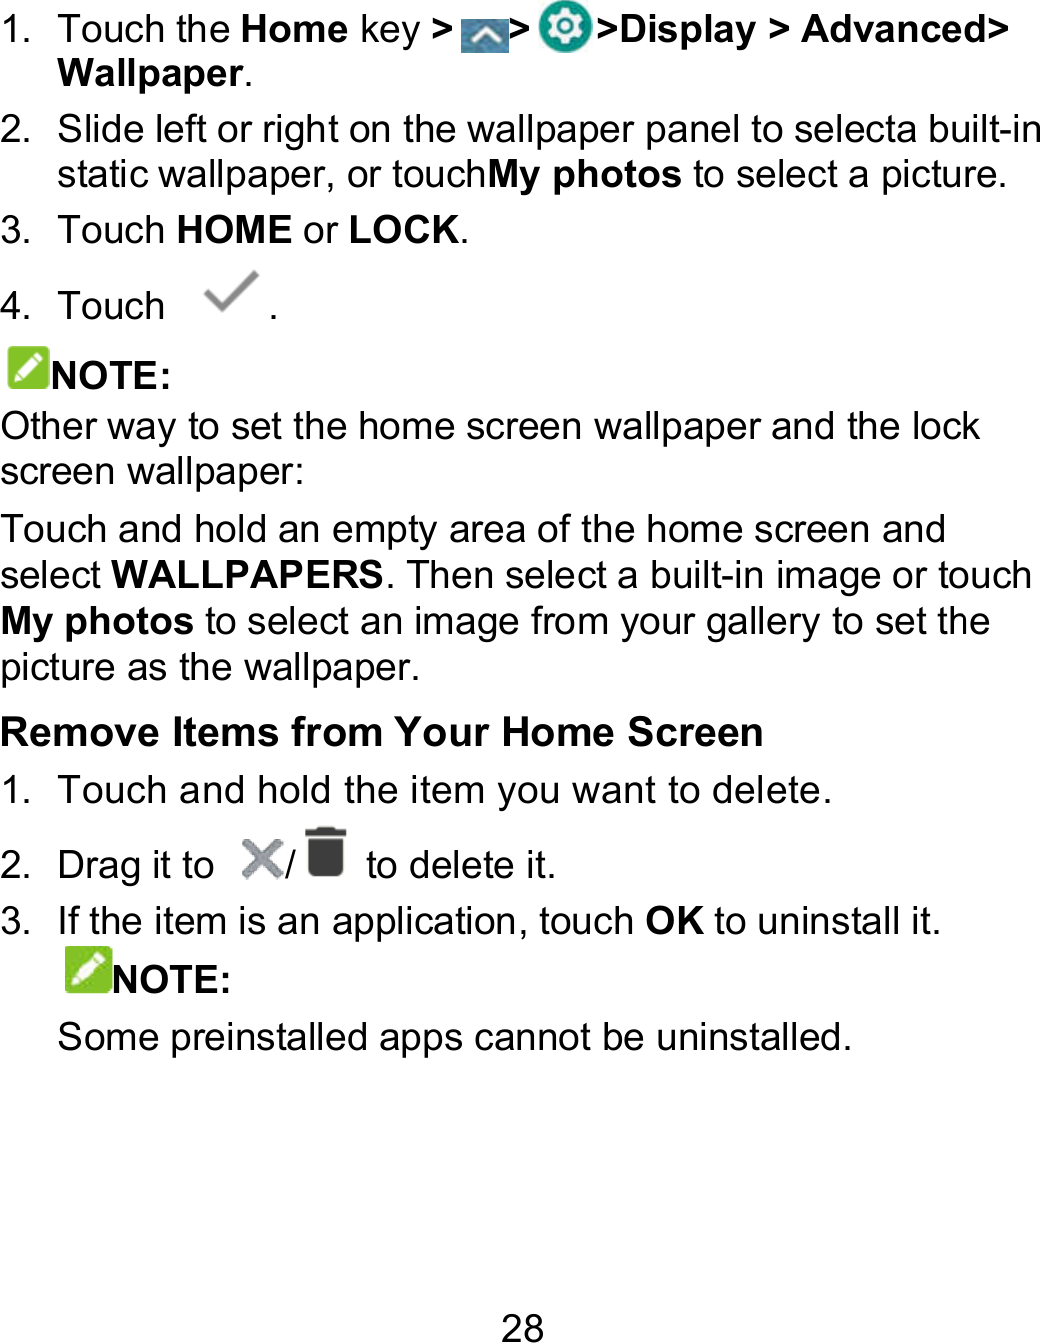 28 1.  Touch the Home key &gt; &gt; &gt;Display &gt; AdvancedWallpaper. 2.  Slide left or right on the wallpaper panel to selecta builtstatic wallpaper, or touchMy photos to select a picture3.  Touch HOME or LOCK. 4.  Touch  . NOTE: Other way to set the home screen wallpaper and the lock screen wallpaper: Touch and hold an empty area of the home screen and select WALLPAPERS. Then select a built-in image or touch My photos to select an image from your gallery to set the picture as the wallpaper. Remove Items from Your Home Screen 1.  Touch and hold the item you want to delete. 2.  Drag it to  /   to delete it. 3.  If the item is an application, touch OK to uninstall it. NOTE:   Some preinstalled apps cannot be uninstalled. Display &gt; Advanced&gt; a built-in to select a picture. lock touch to set the  